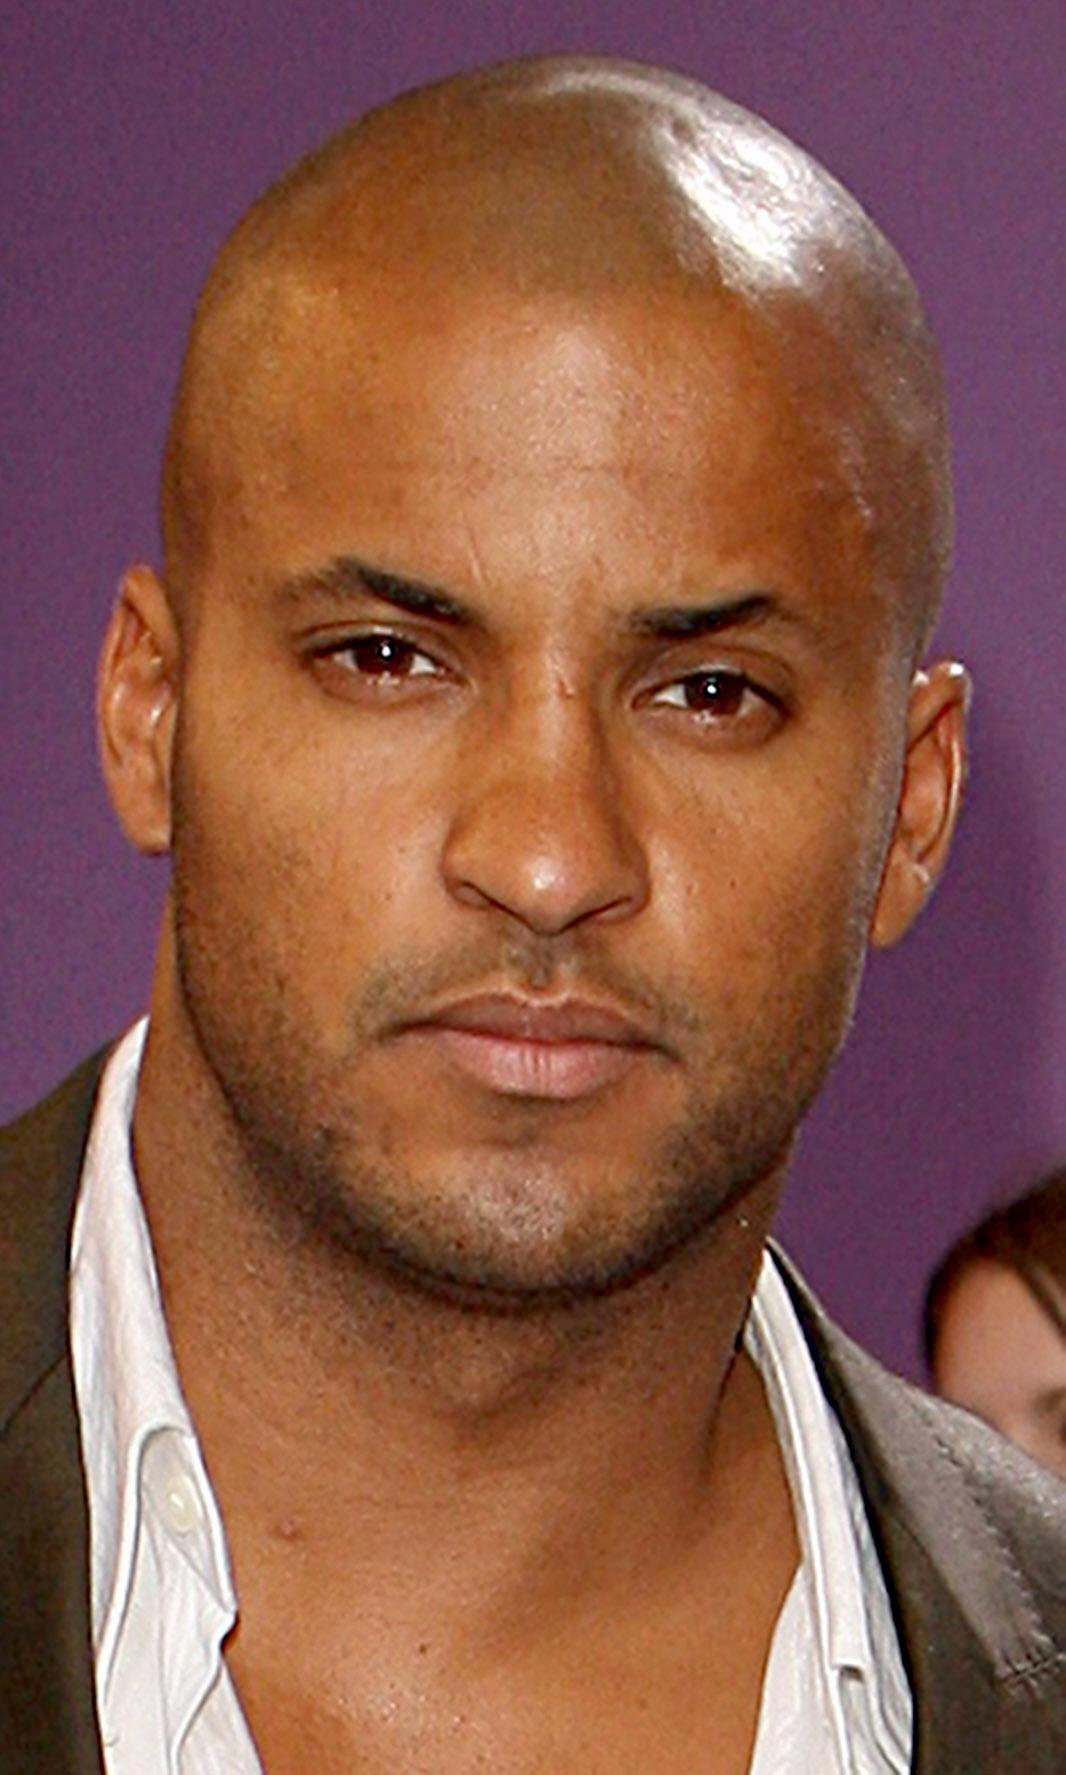 Brief about Ricky Whittle.